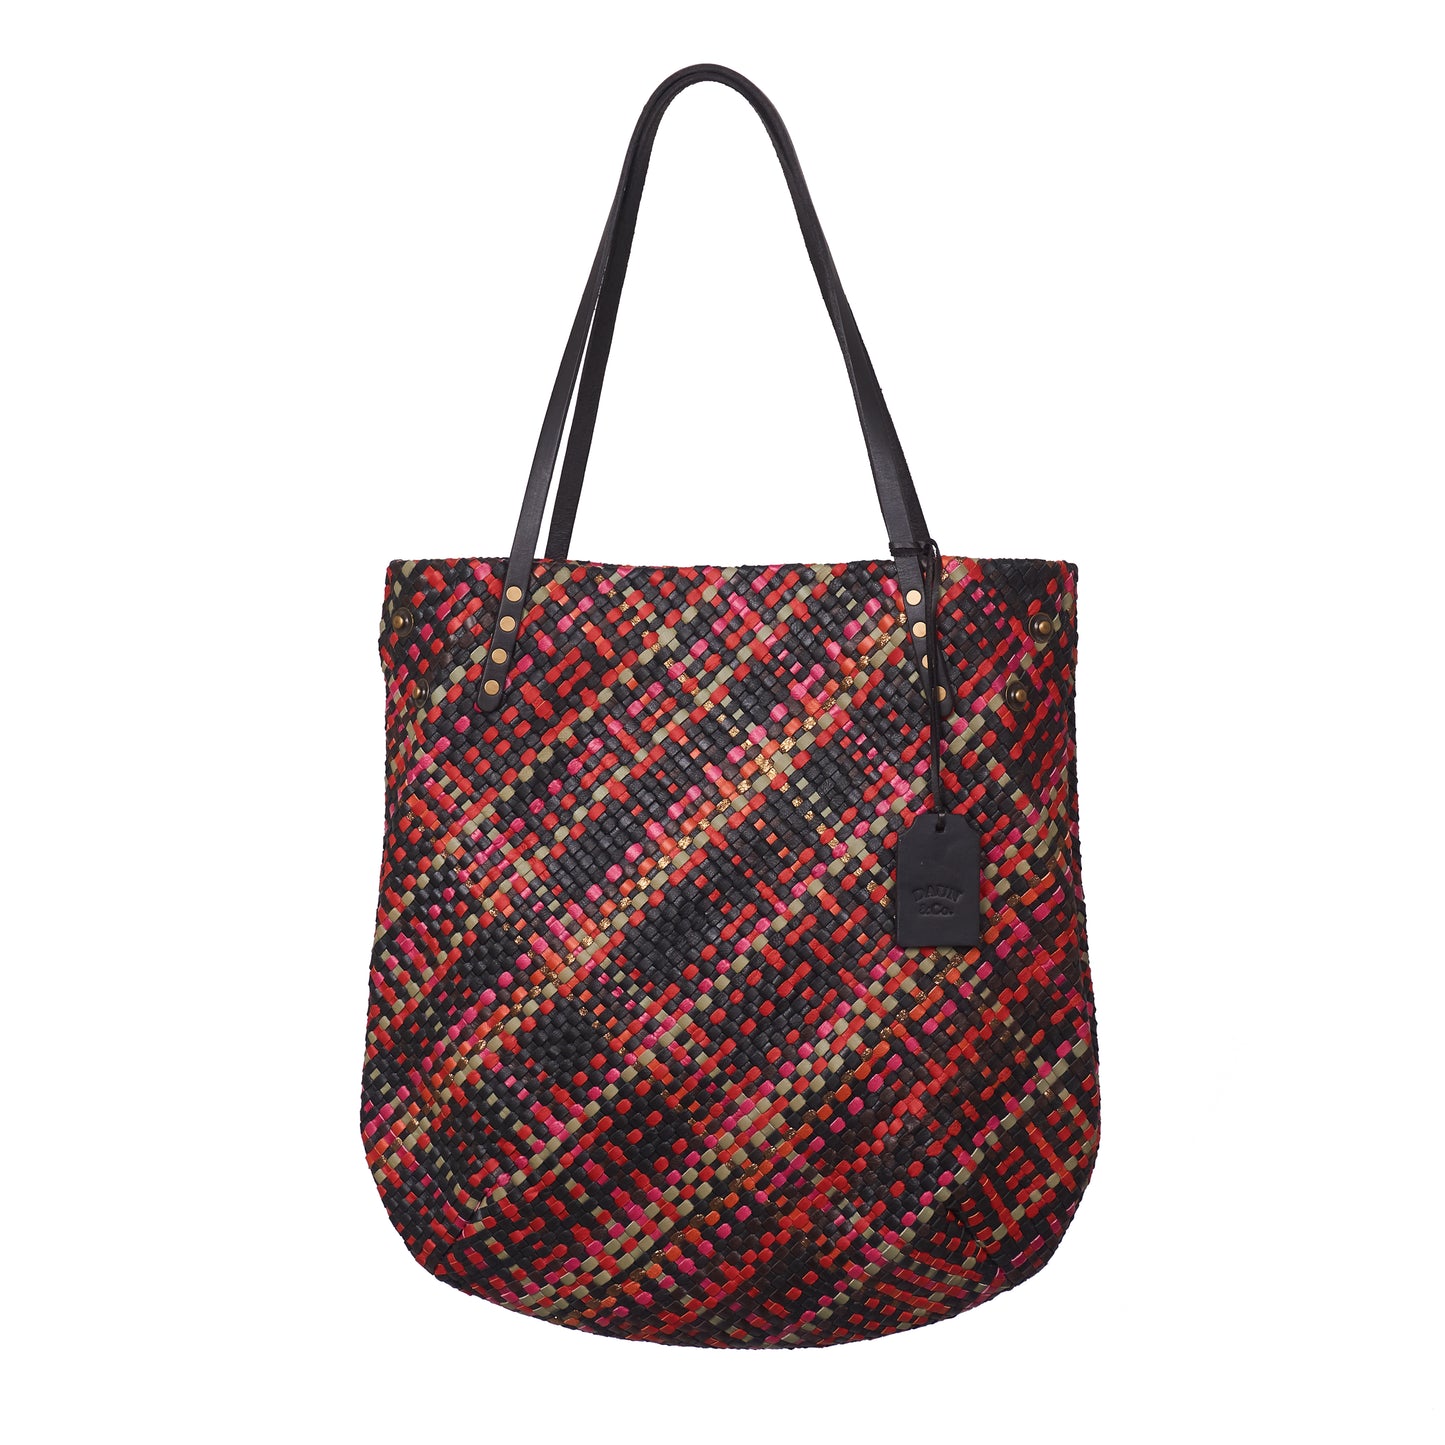 SIMPLY FIVE TOTE - Woven Leather | Mix Reds